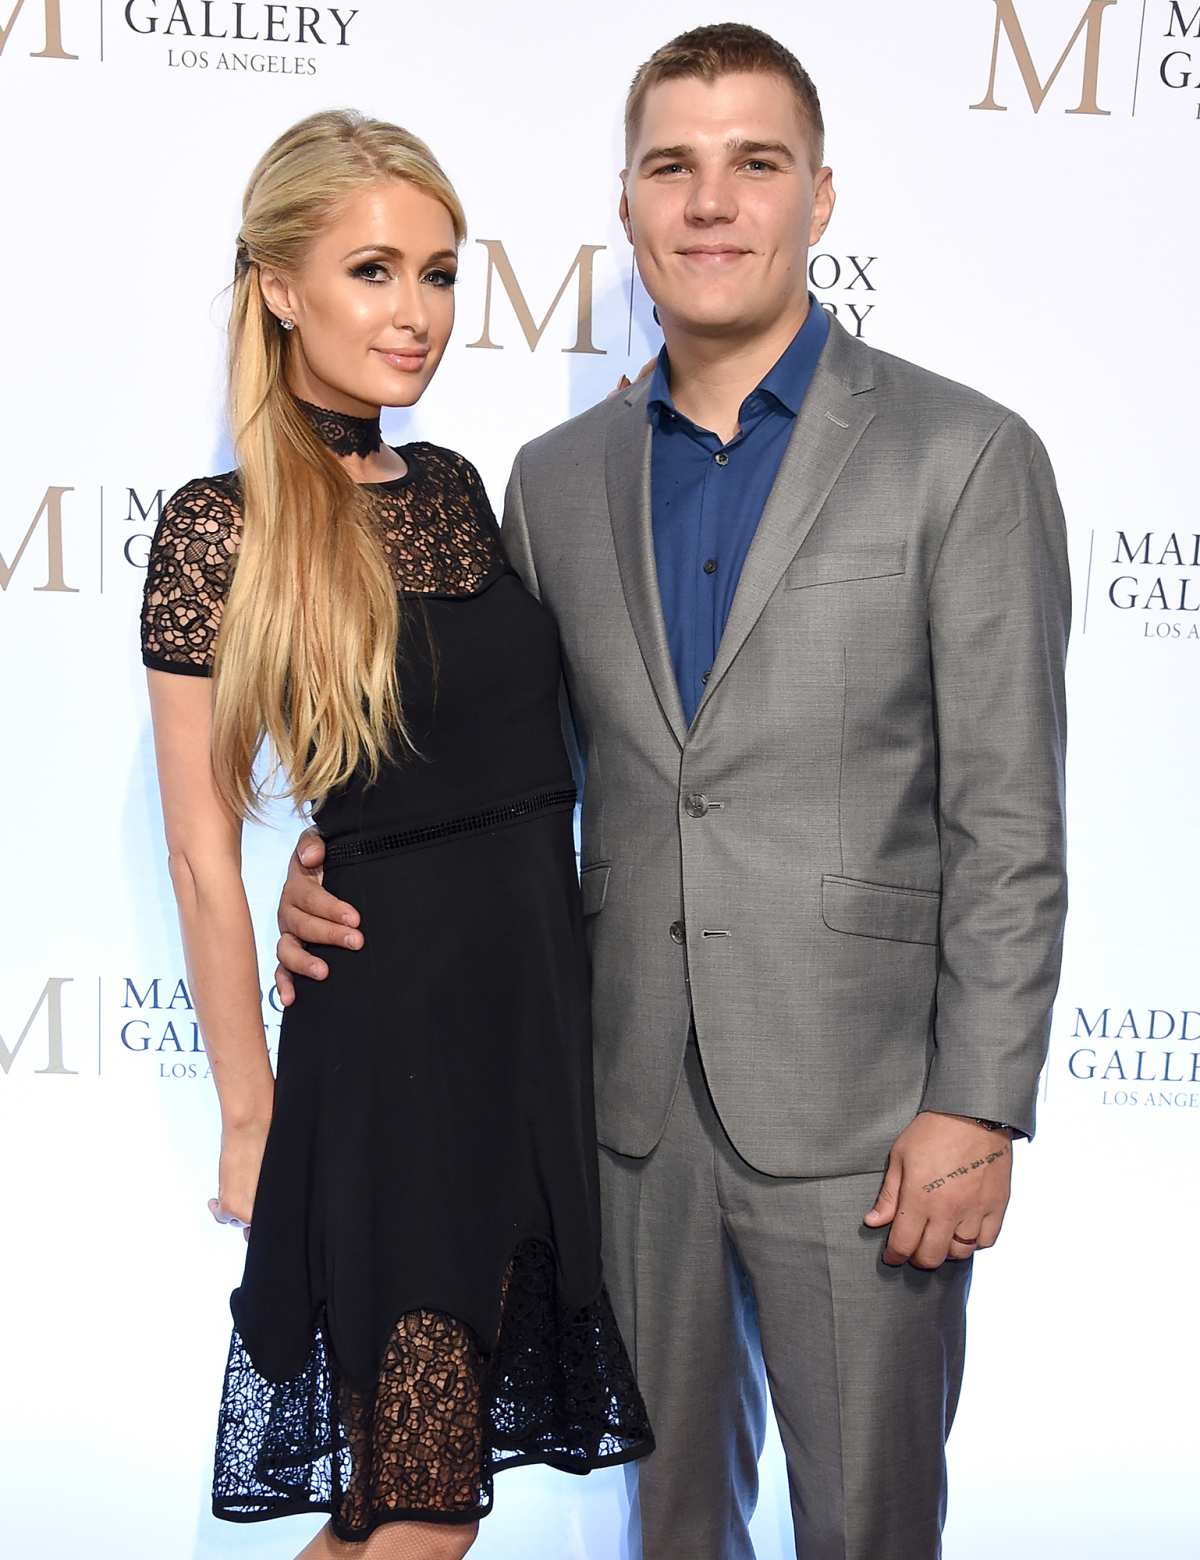 Paris Hilton gushes over her friendship with Kim Kardashian and discusses  split with Chris Zylka